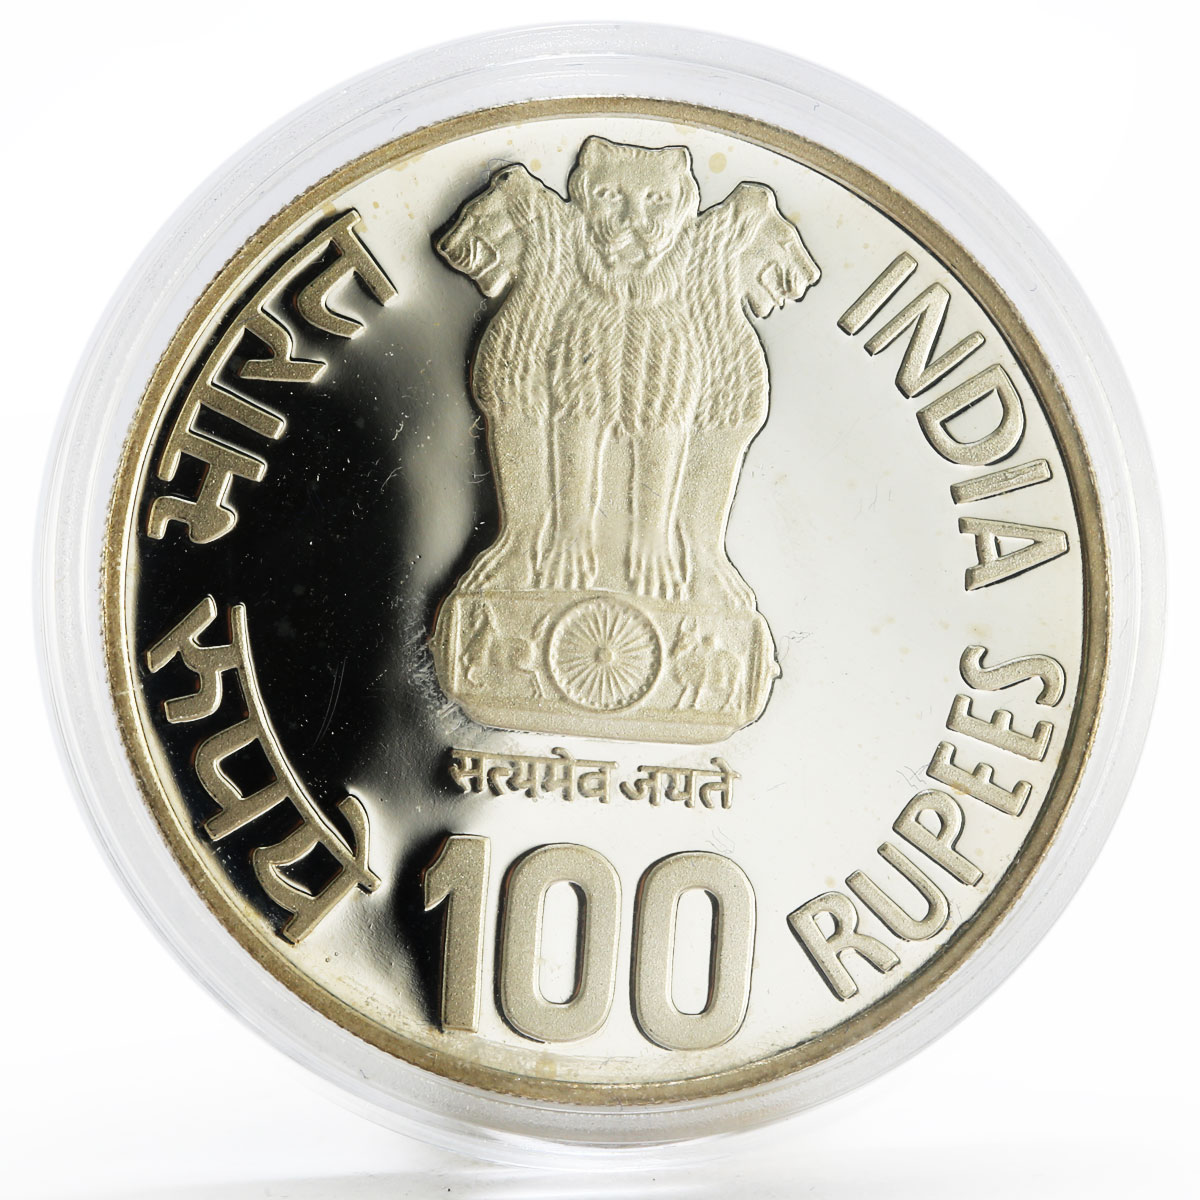 India 100 rupees International Year of the Child proof silver coin 1981